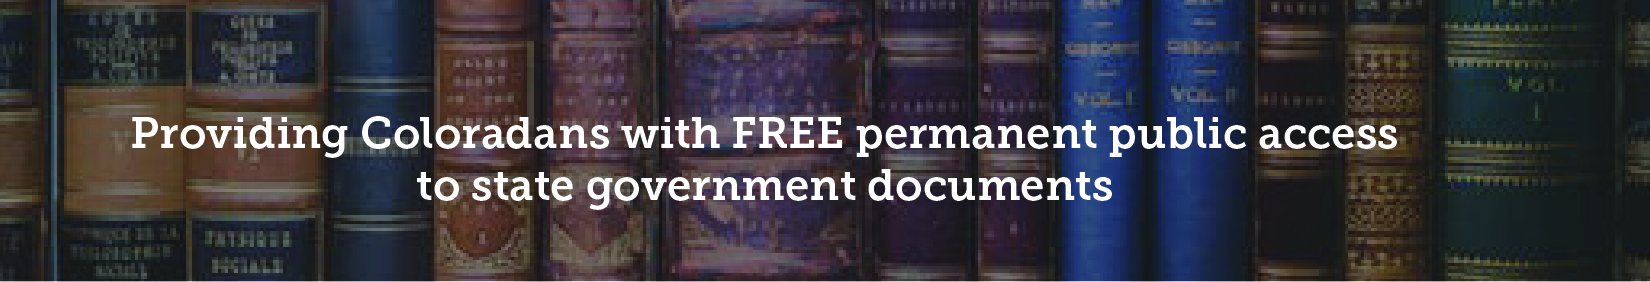 Providing Coloradans with FREE permanent public access to state government documents